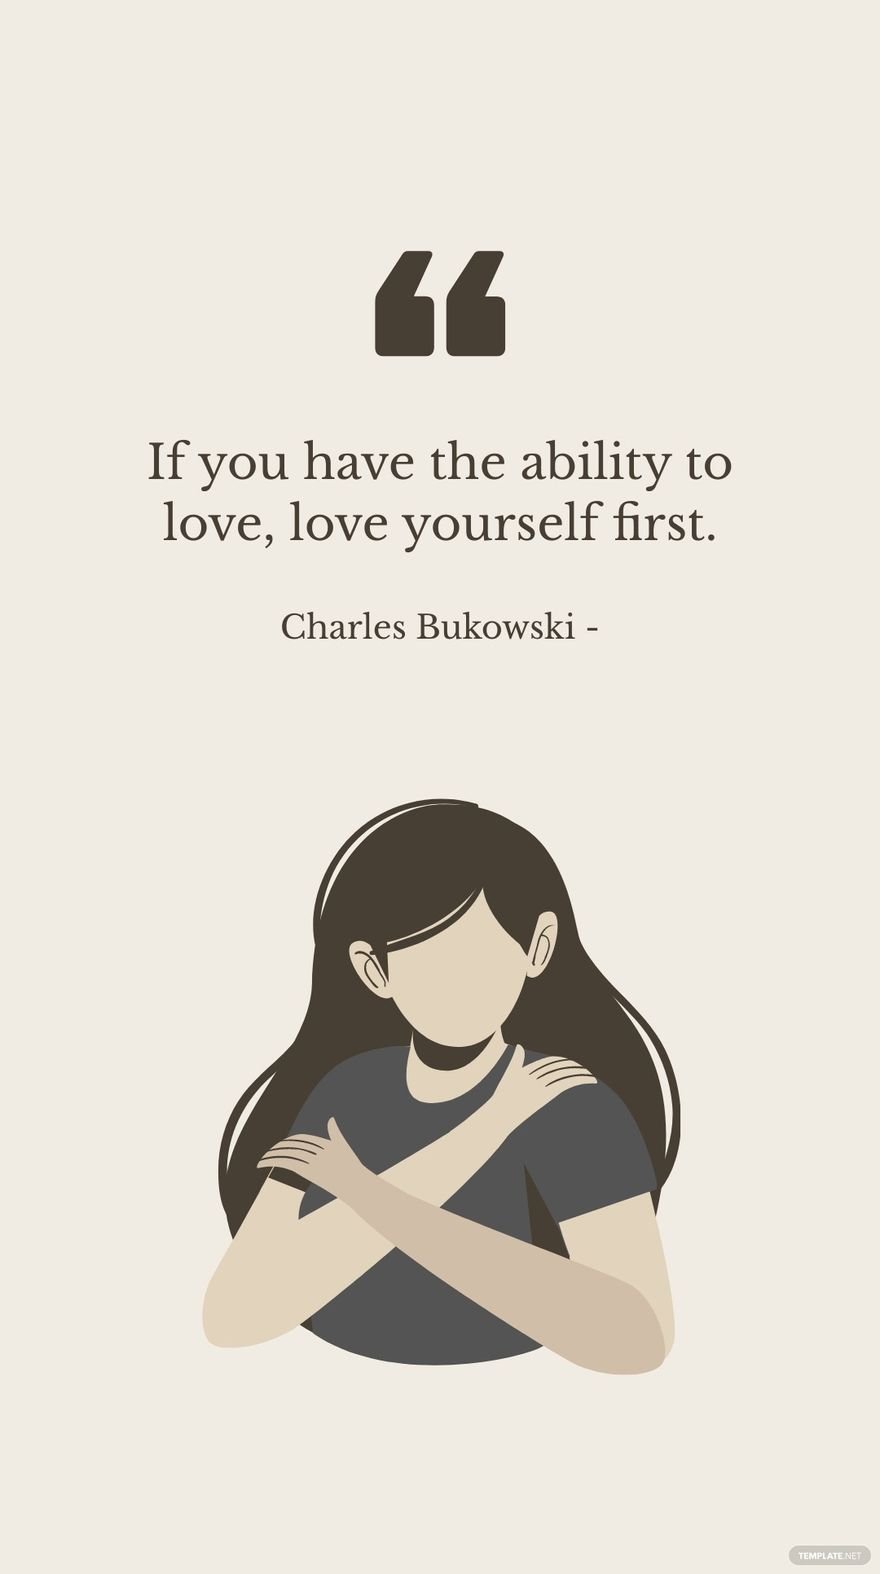 Charles Bukowski - If you have the ability to love, love yourself first.